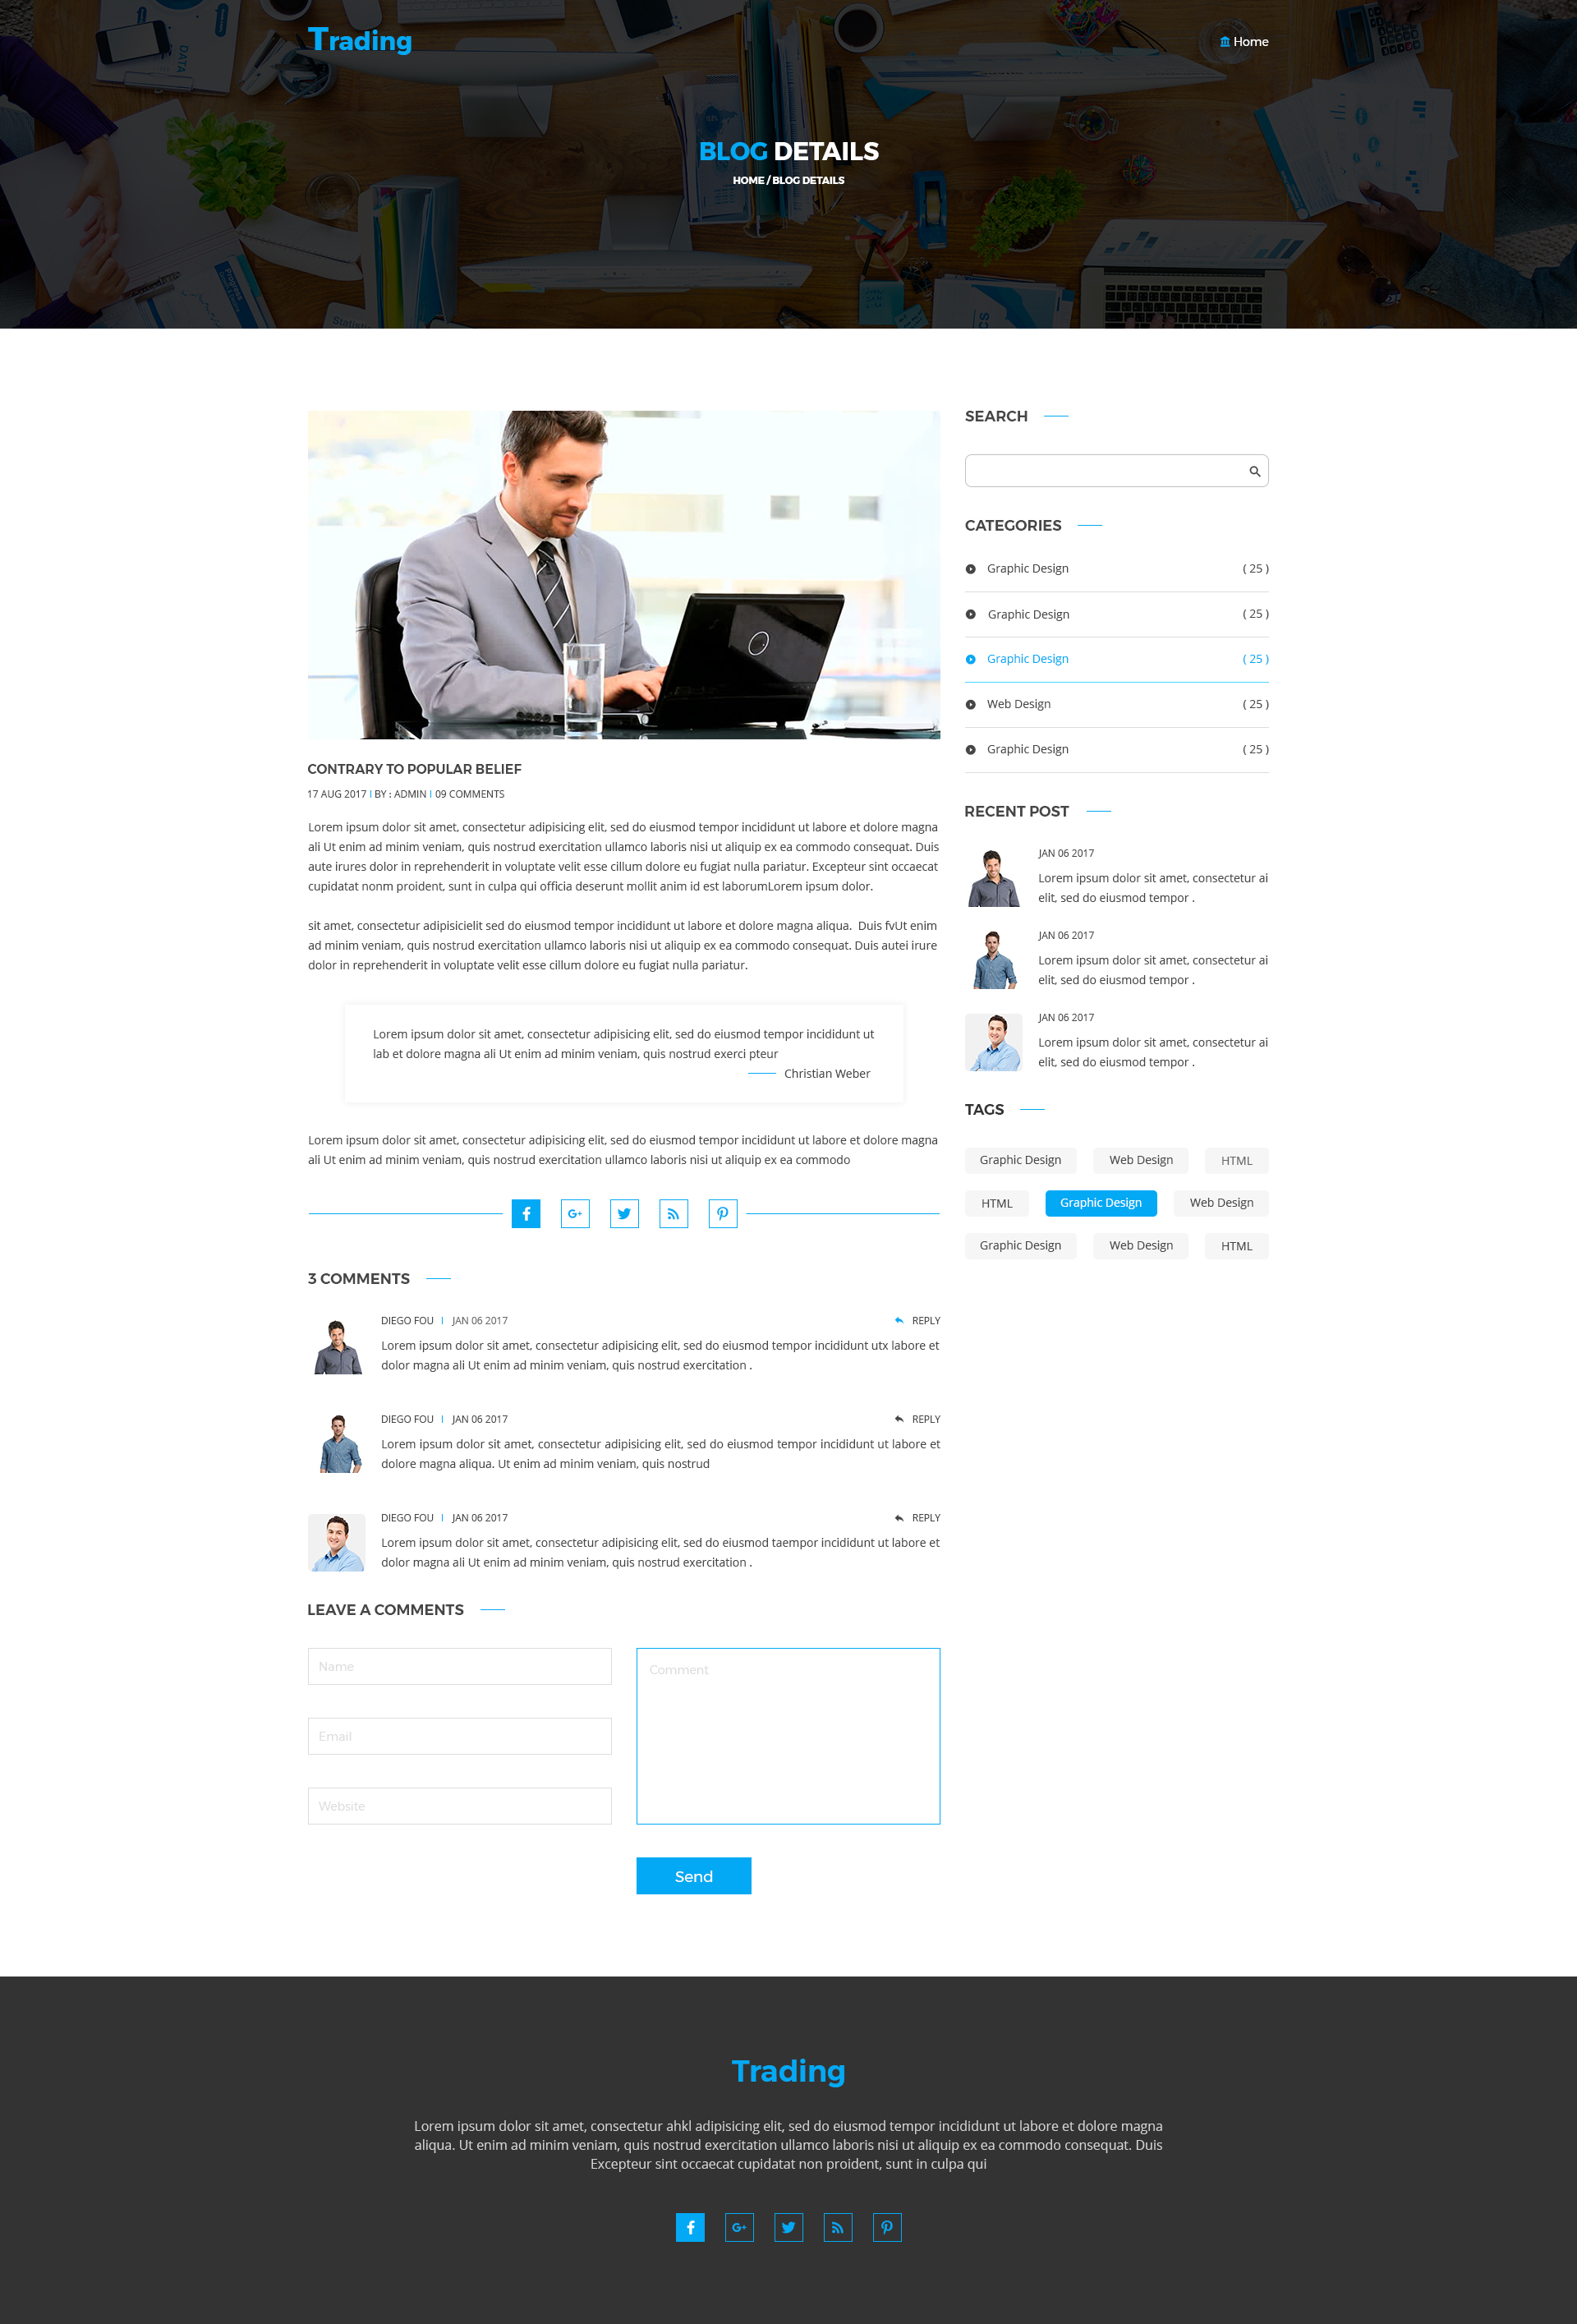 Trading - Corporate PSD Template